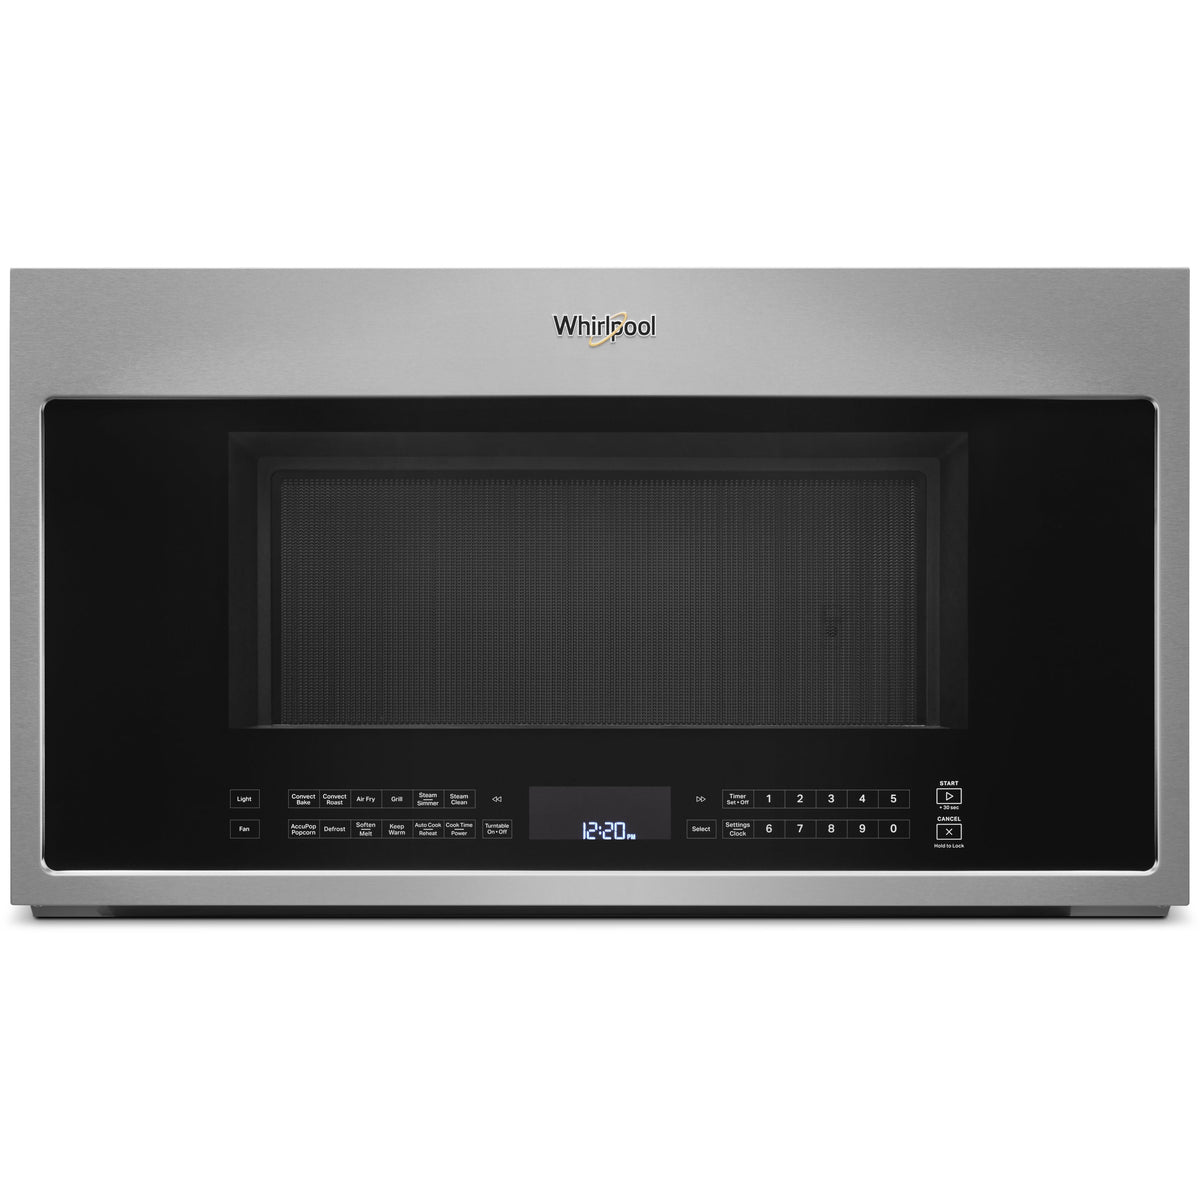 1.9 cu. ft. Over-The-Range Microwave Oven with Air Fry YWMH78519LZ IMAGE 1